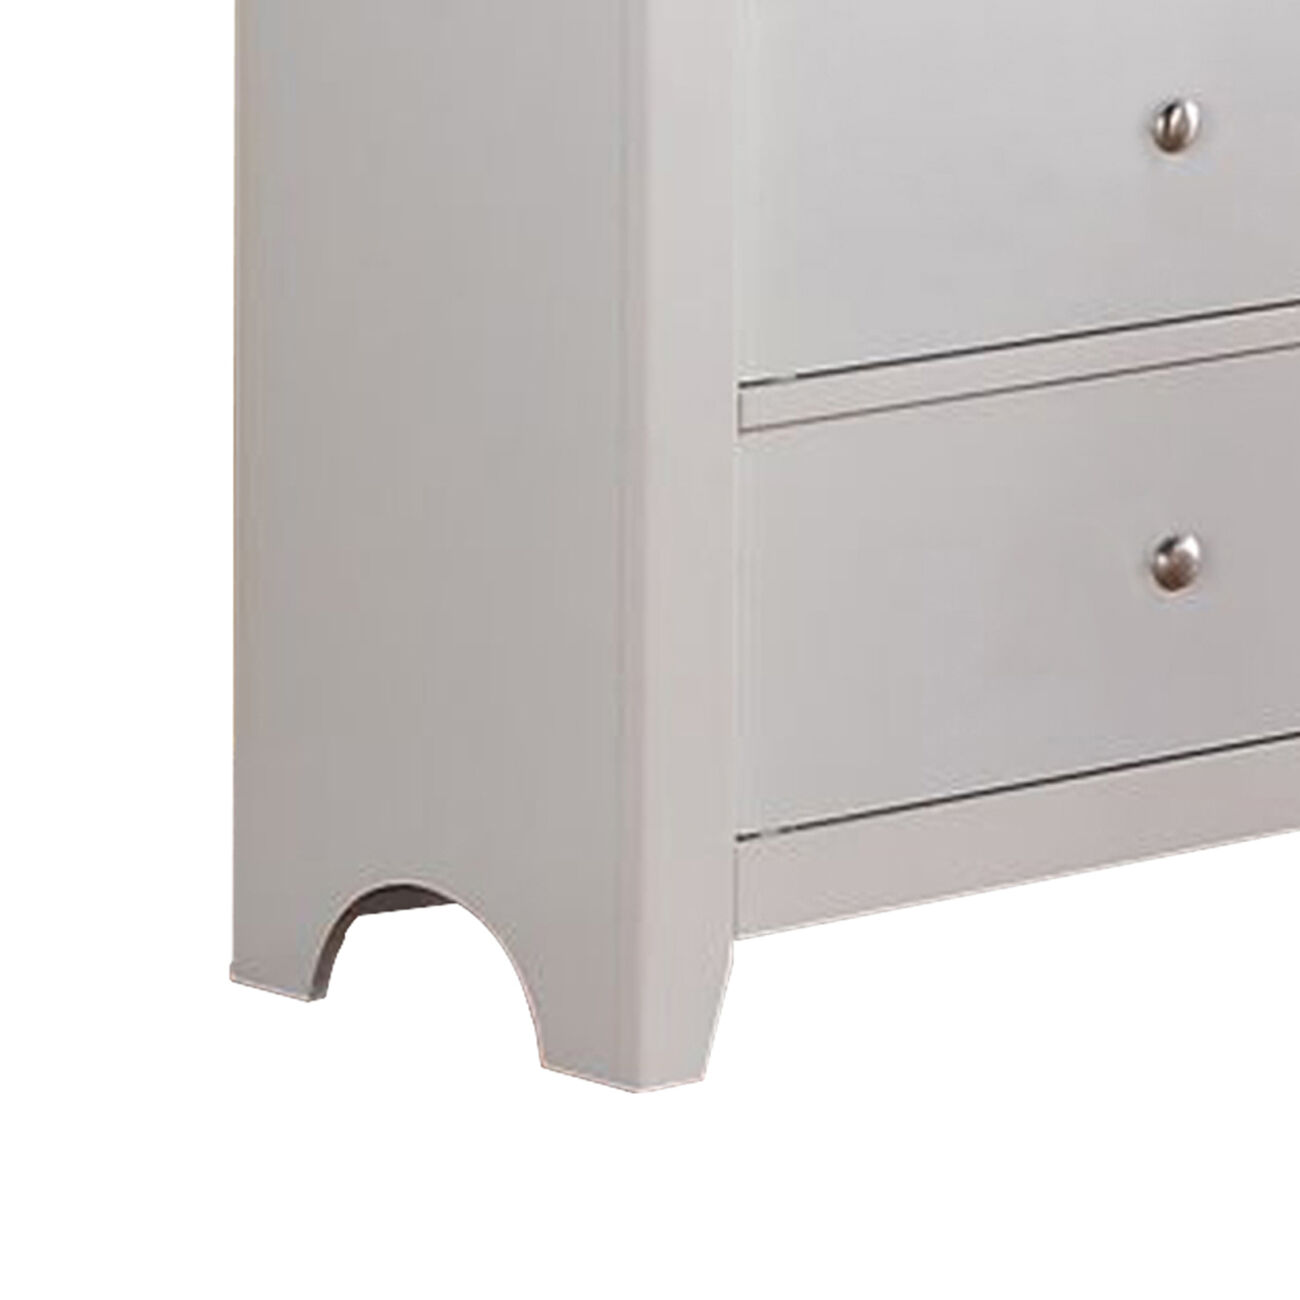 Pine Wood 6 Drawer Dresser With Silver Knobs, White